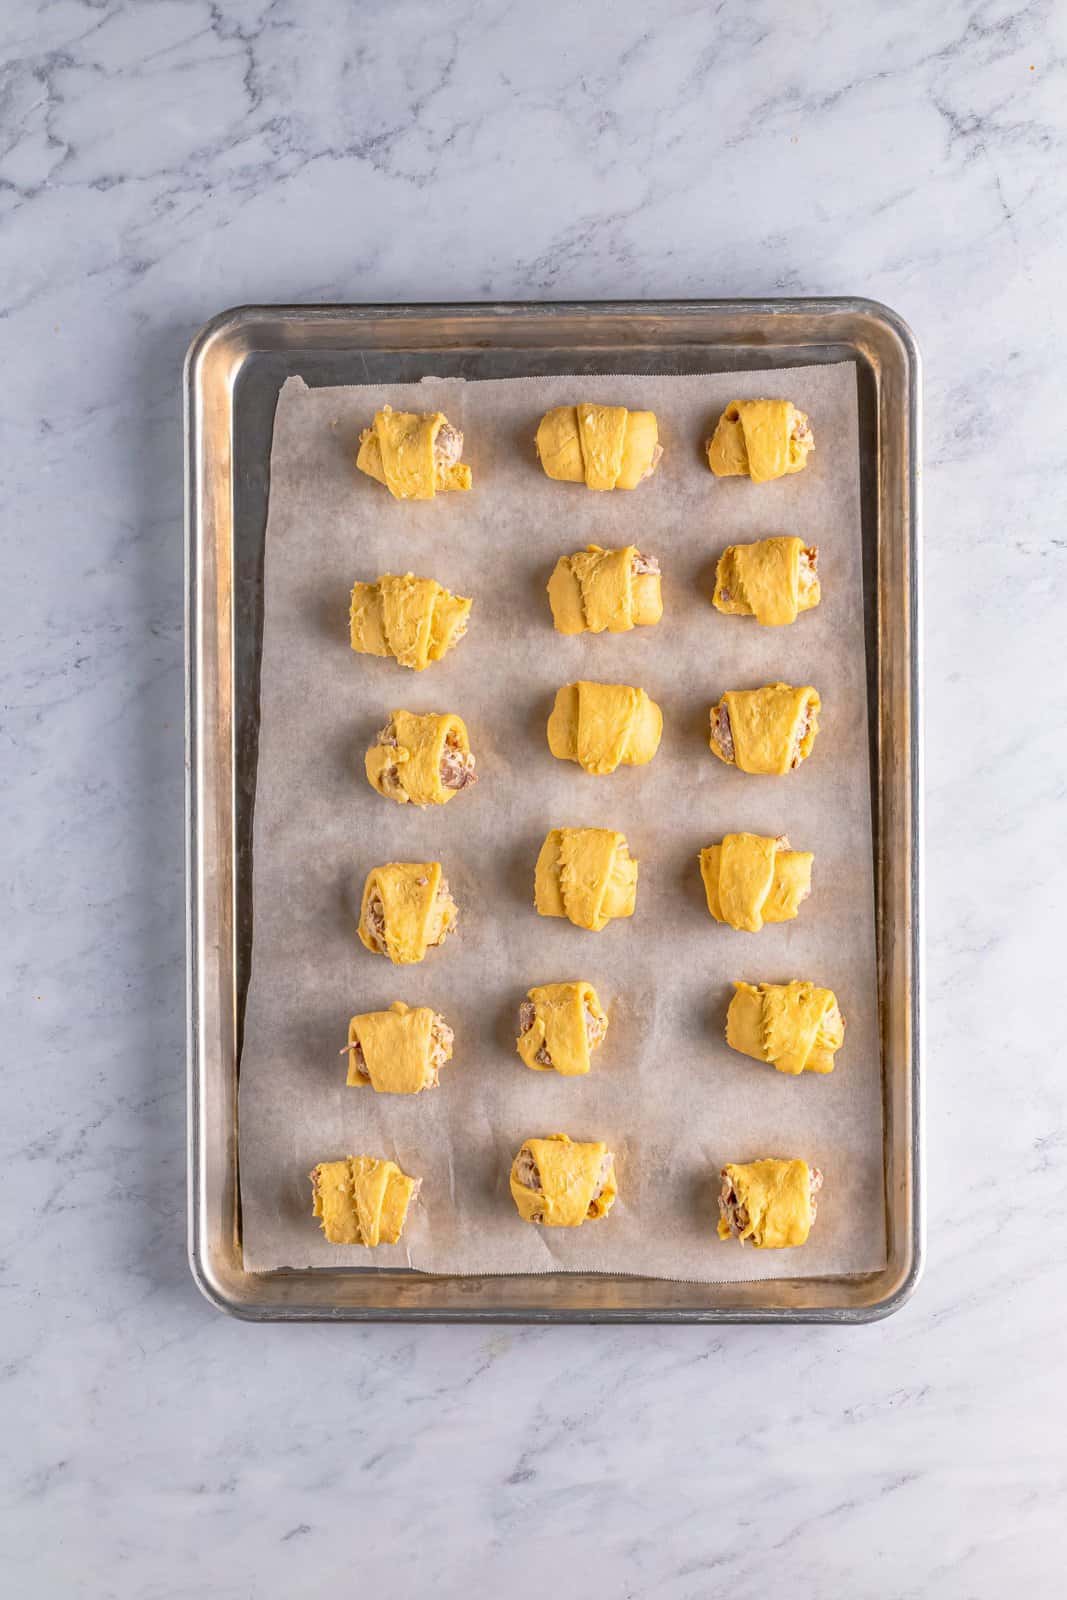 Rolled up crescent puffs on parchment lined baking sheet.